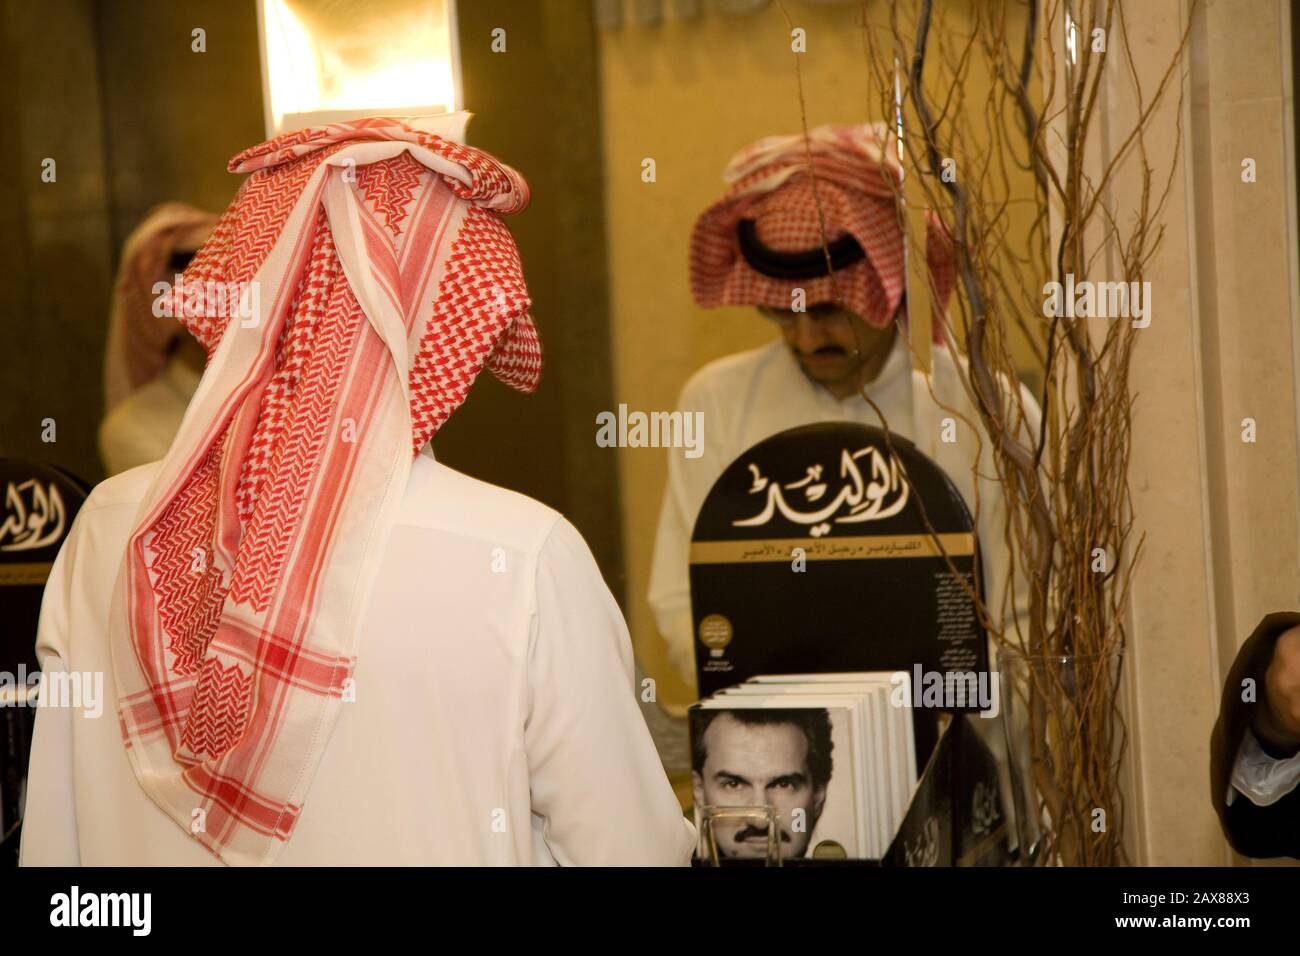 A mirror image of His Royal Highness Prince Al Waleed Bin Talal Al-Saud flipping through a stack of auto-biographies in his office at the Kingdom Holding Company, Riyadh, Saudi Arabia. Stock Photo